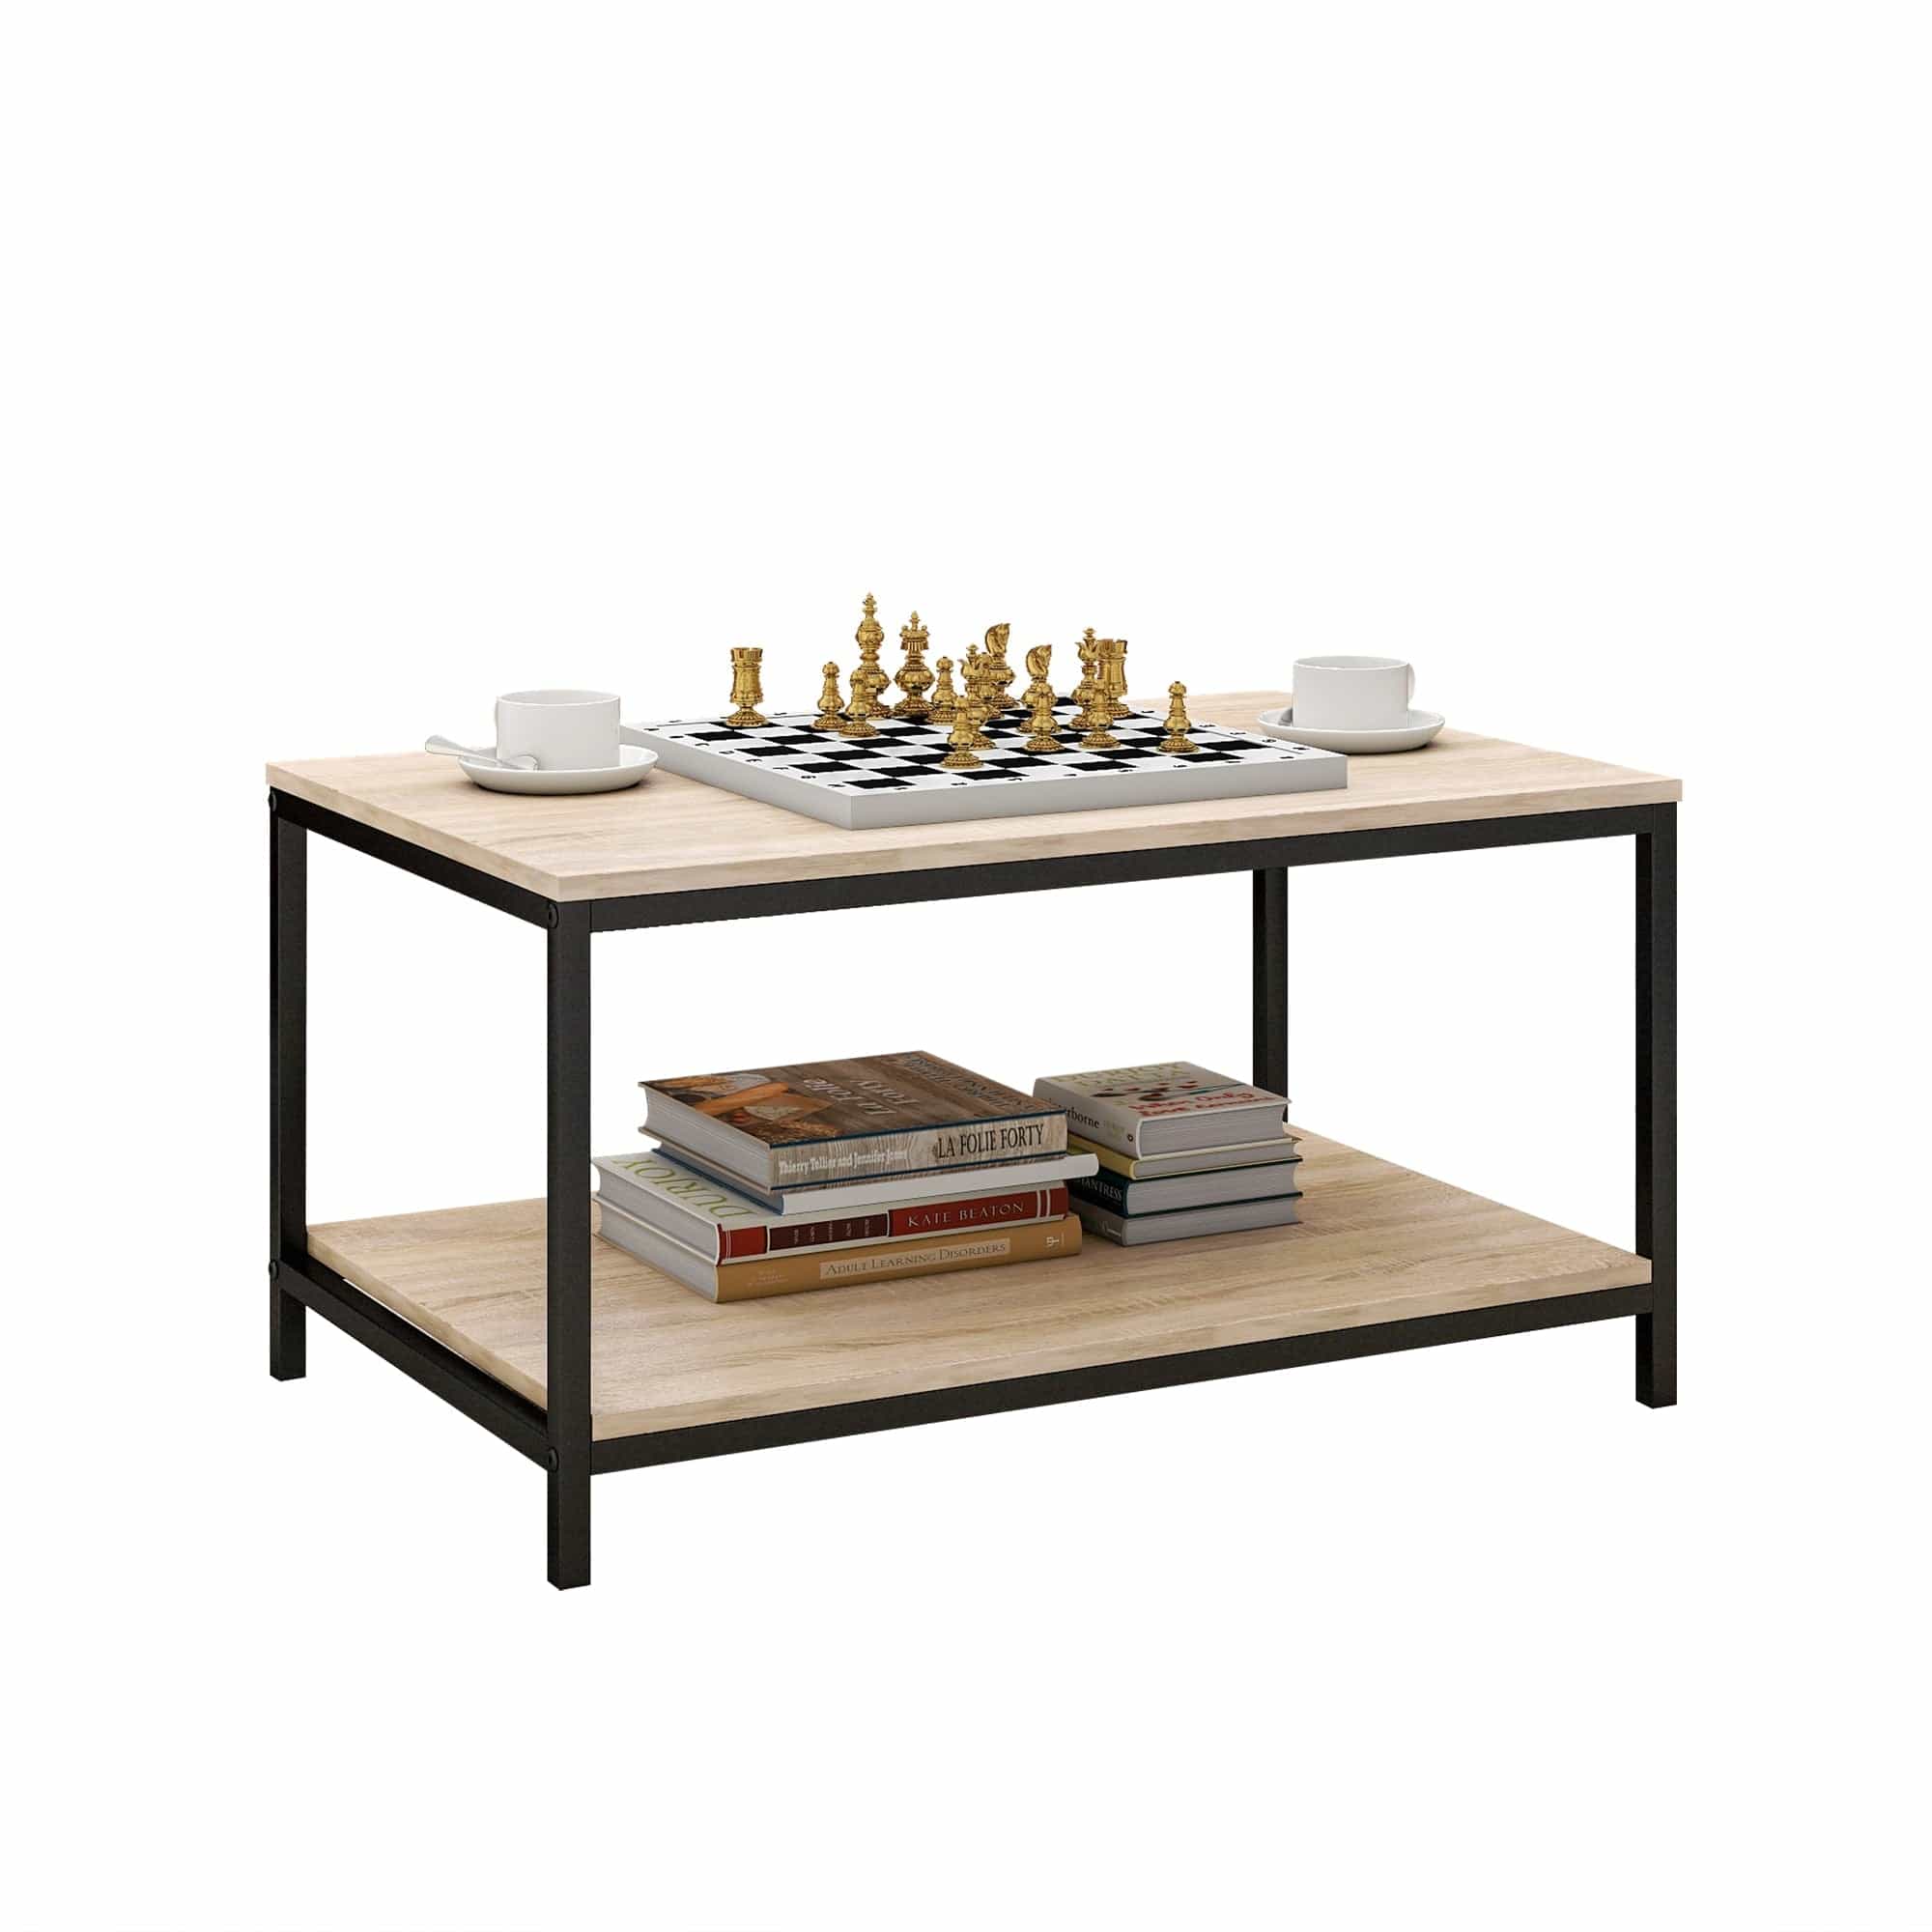 Table basse rectangulaire bois